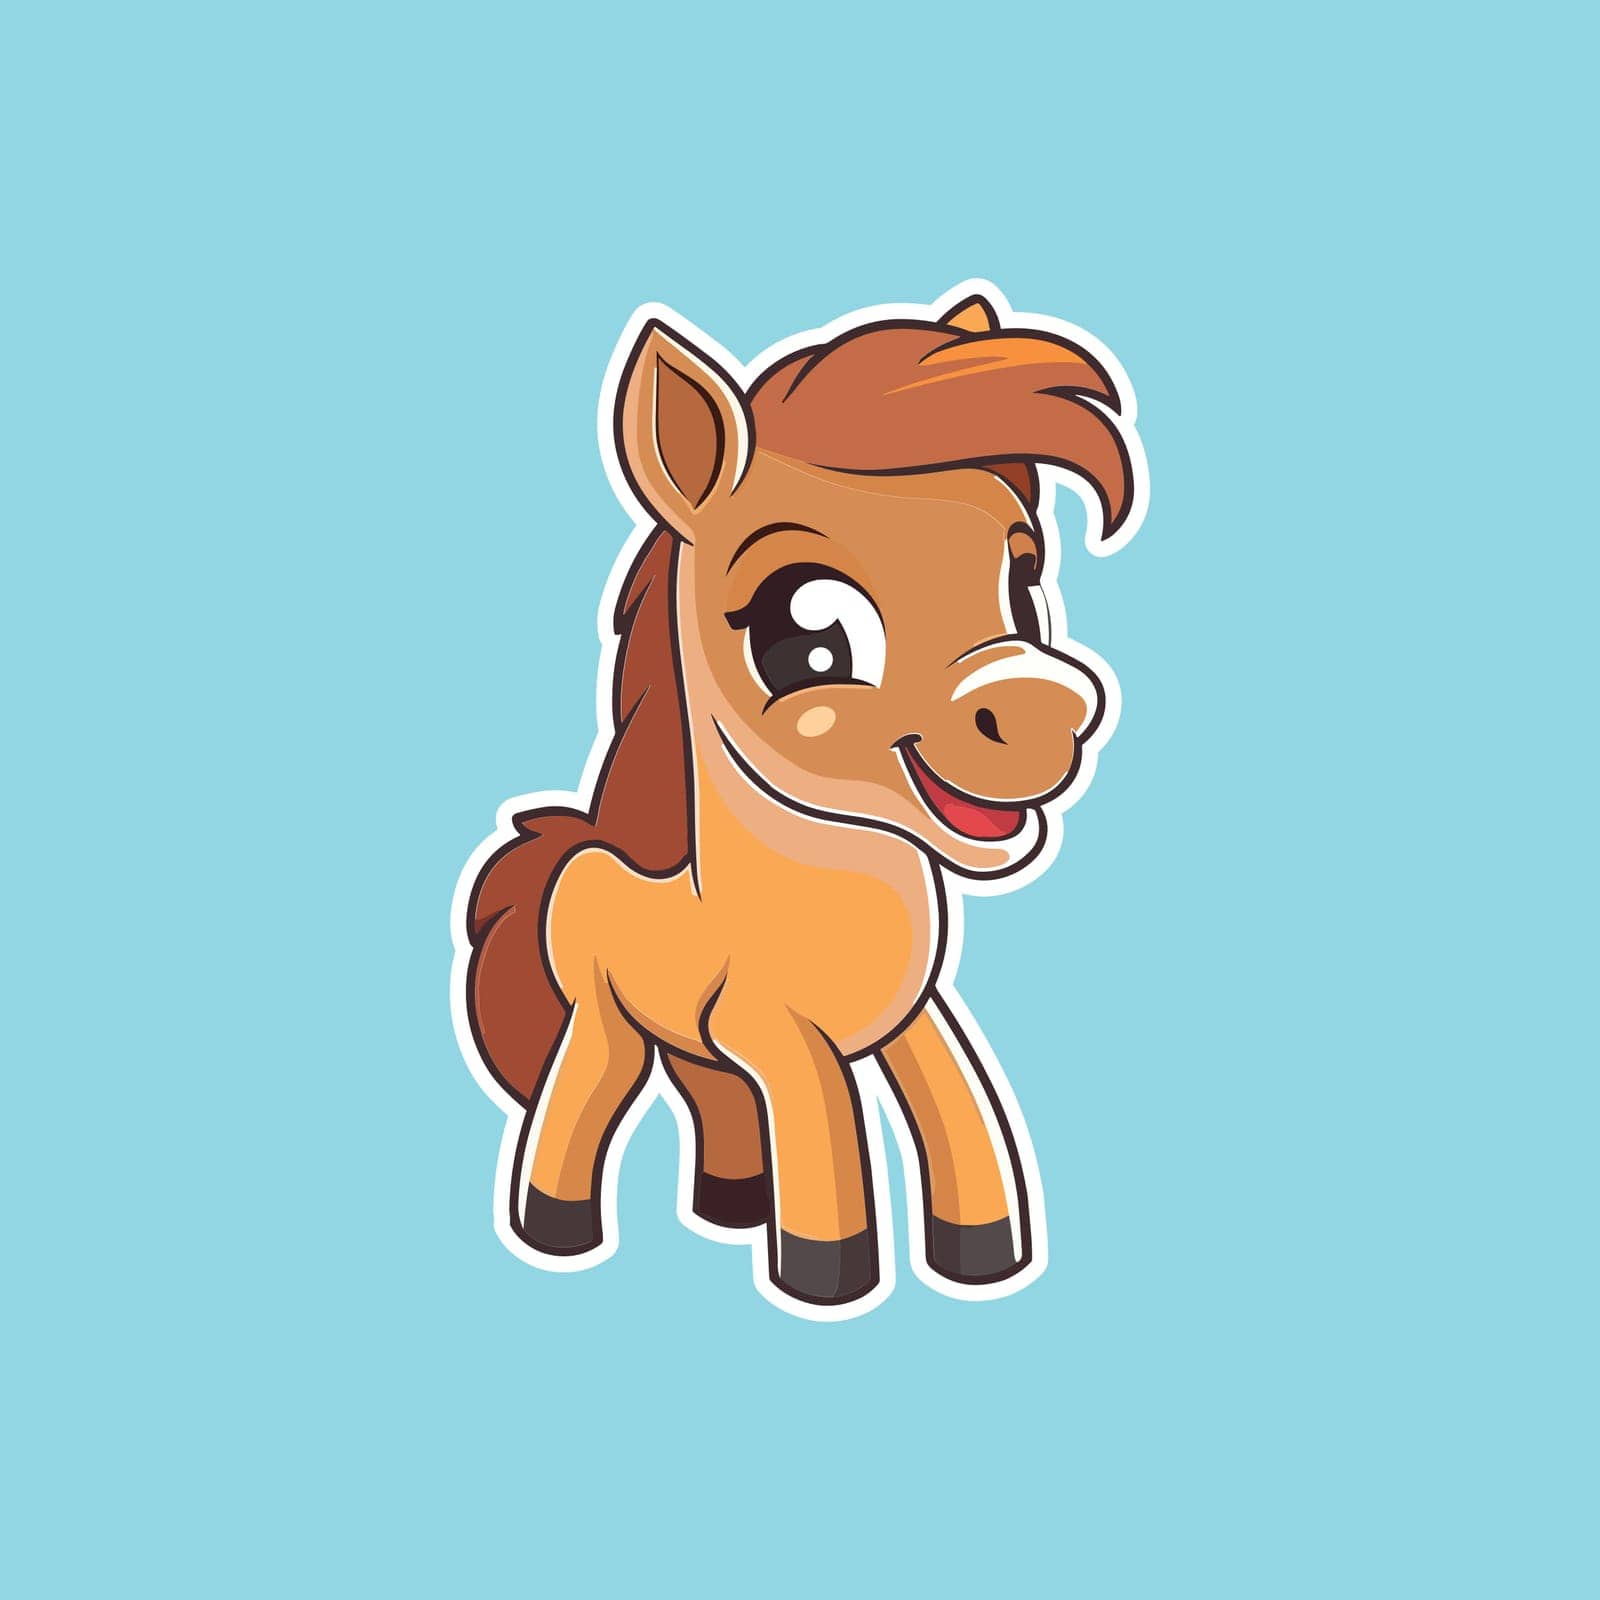 Painted cute funny brown smiling horse sticker by Vinhsino